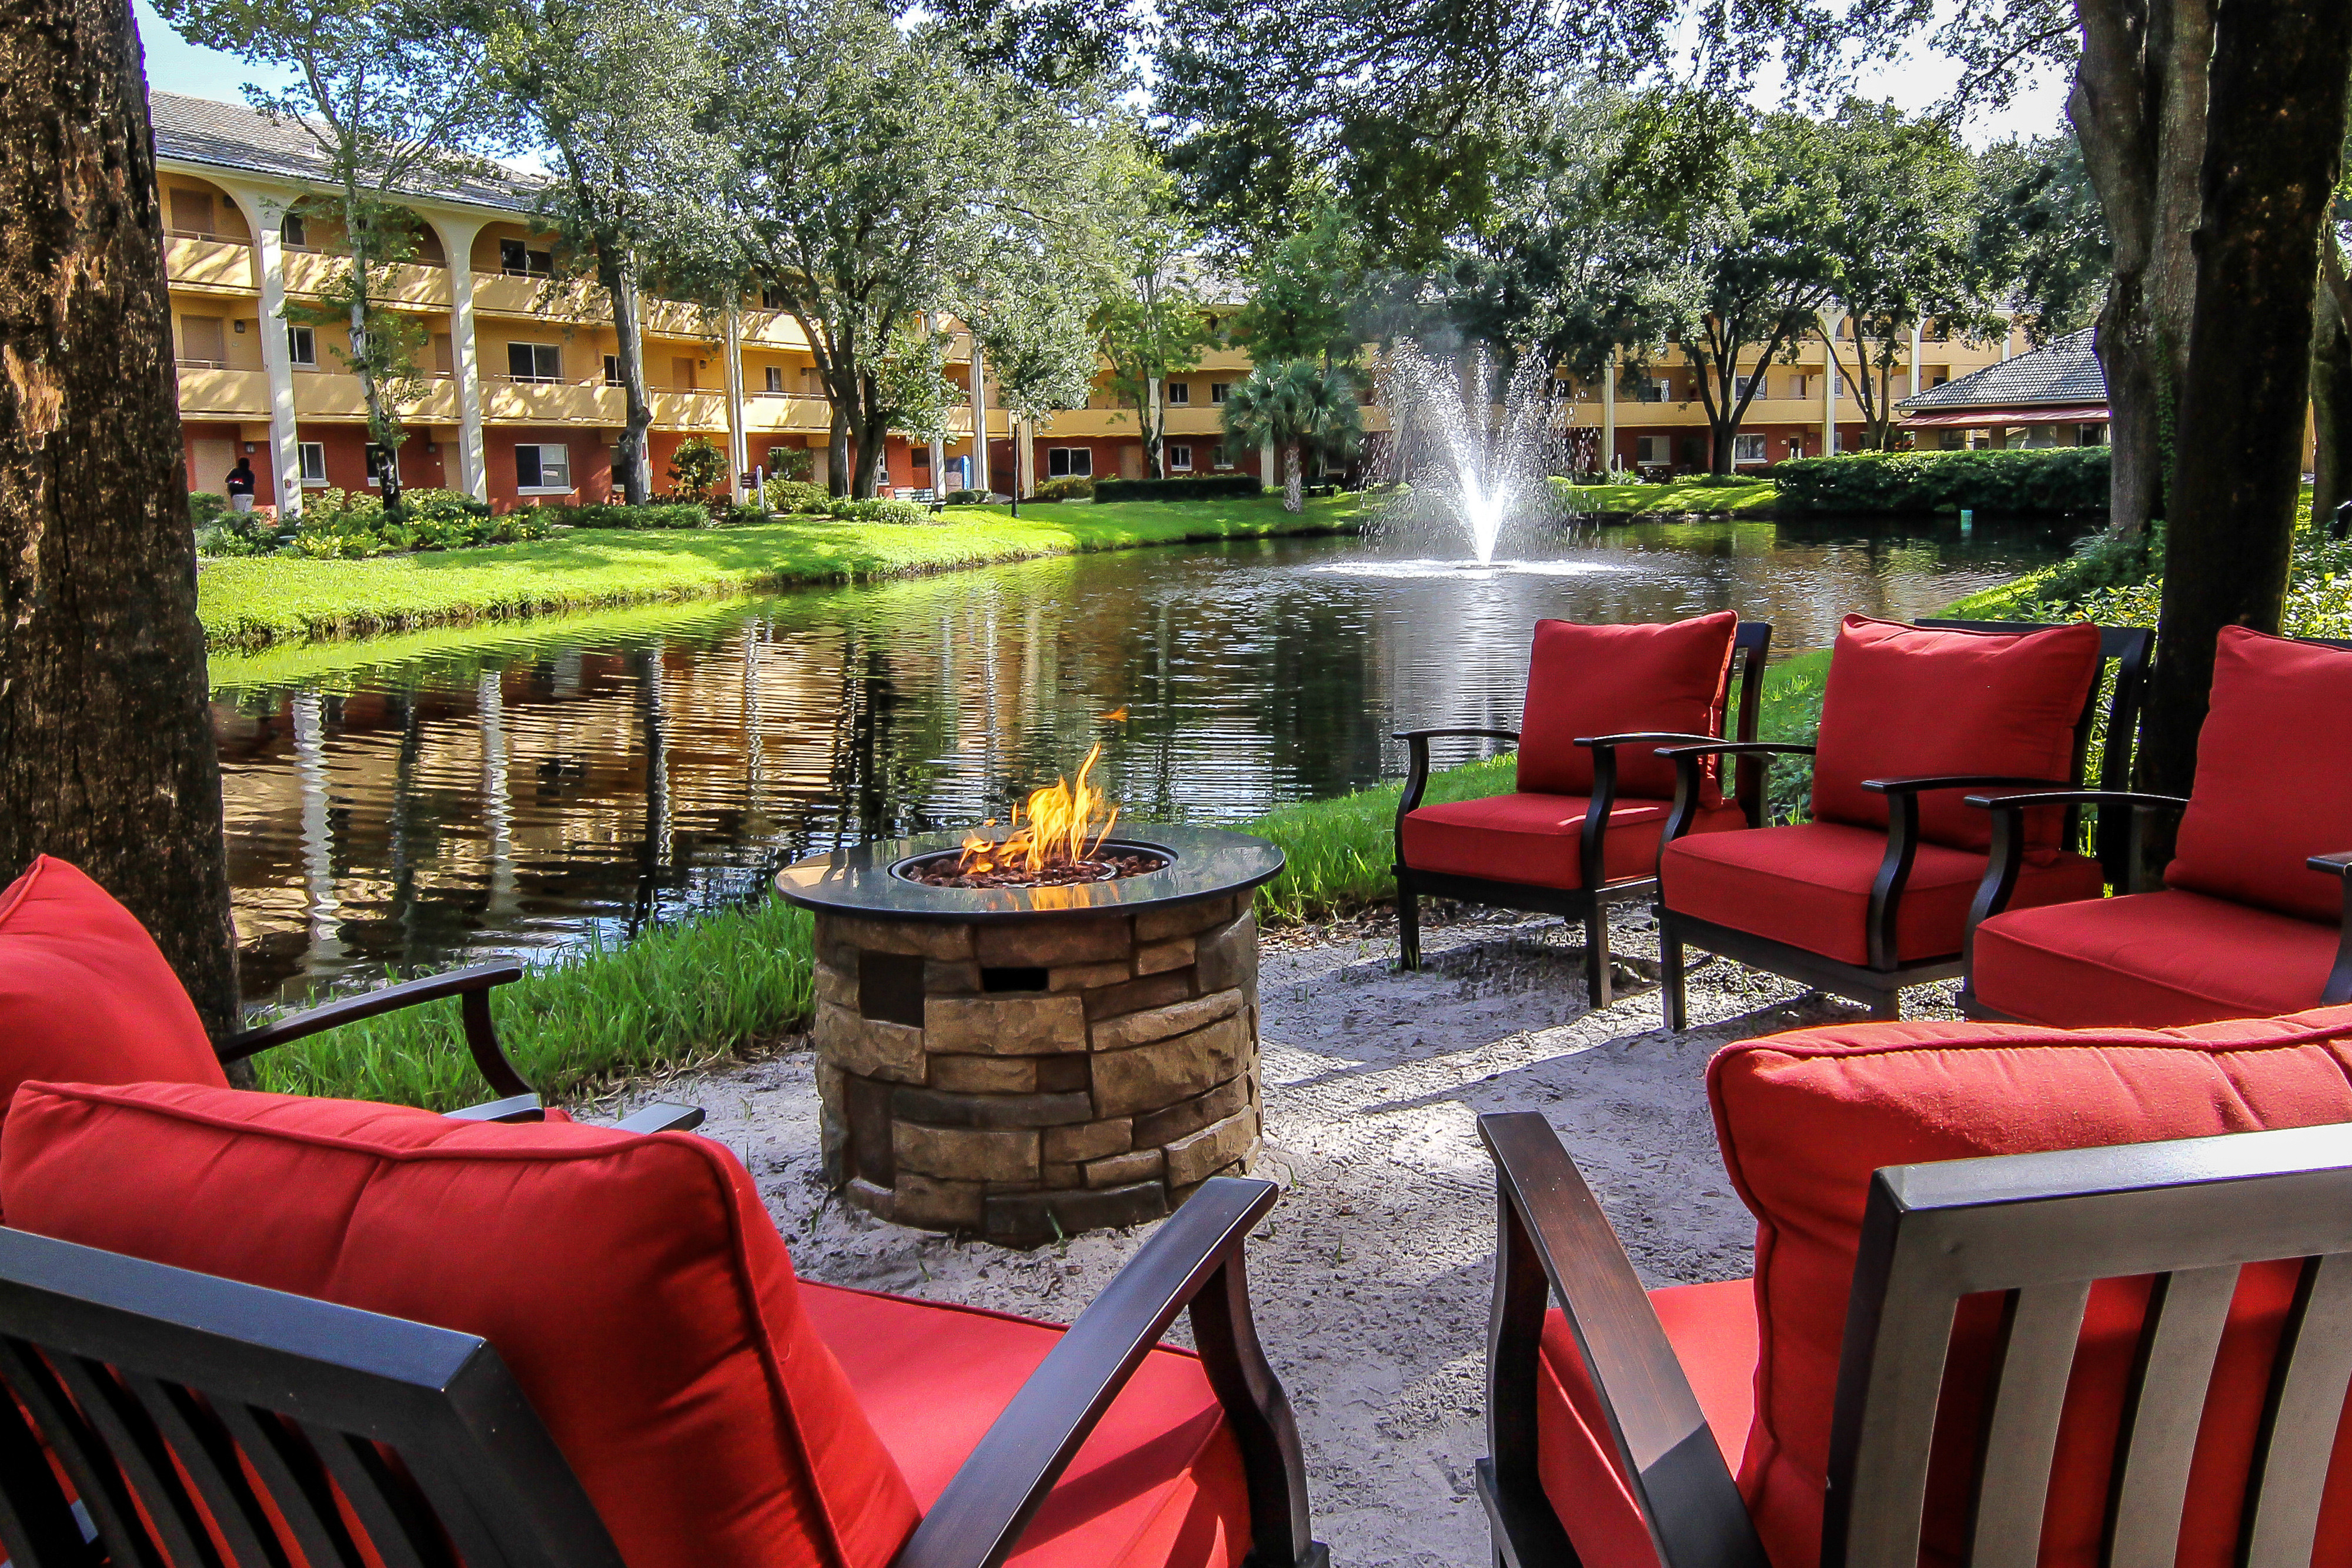 Fire pit with chairs in front of lake at one of our leisure hotels close to Seaworld Orlando | Westgate Leisure Resort | Westgate Resorts